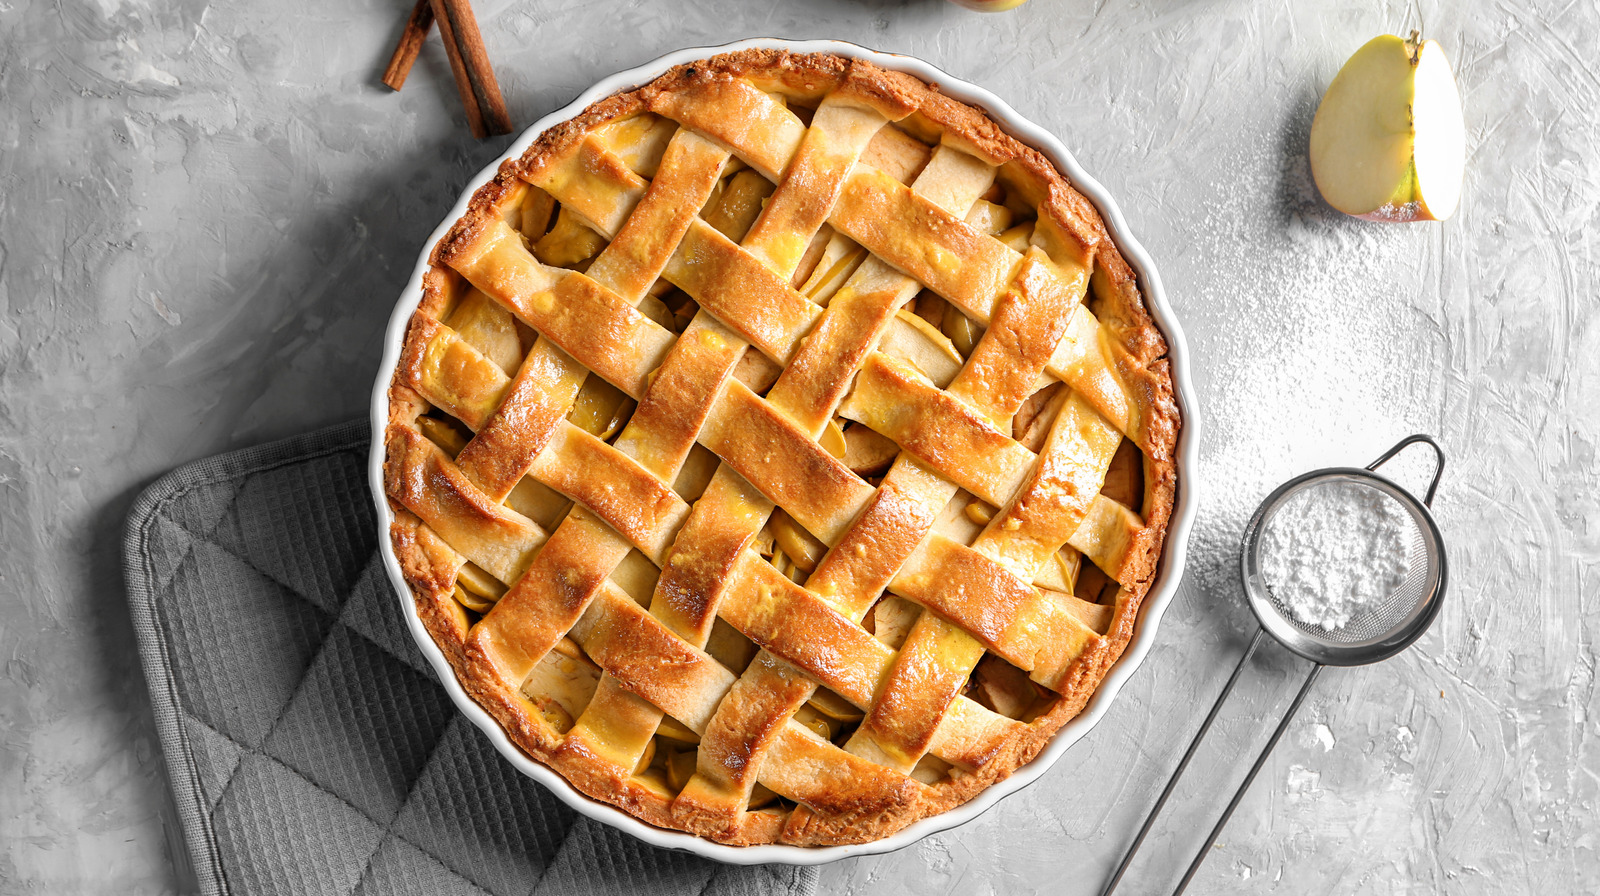 This May Be Why Your Pie Crust Turned Out Bland